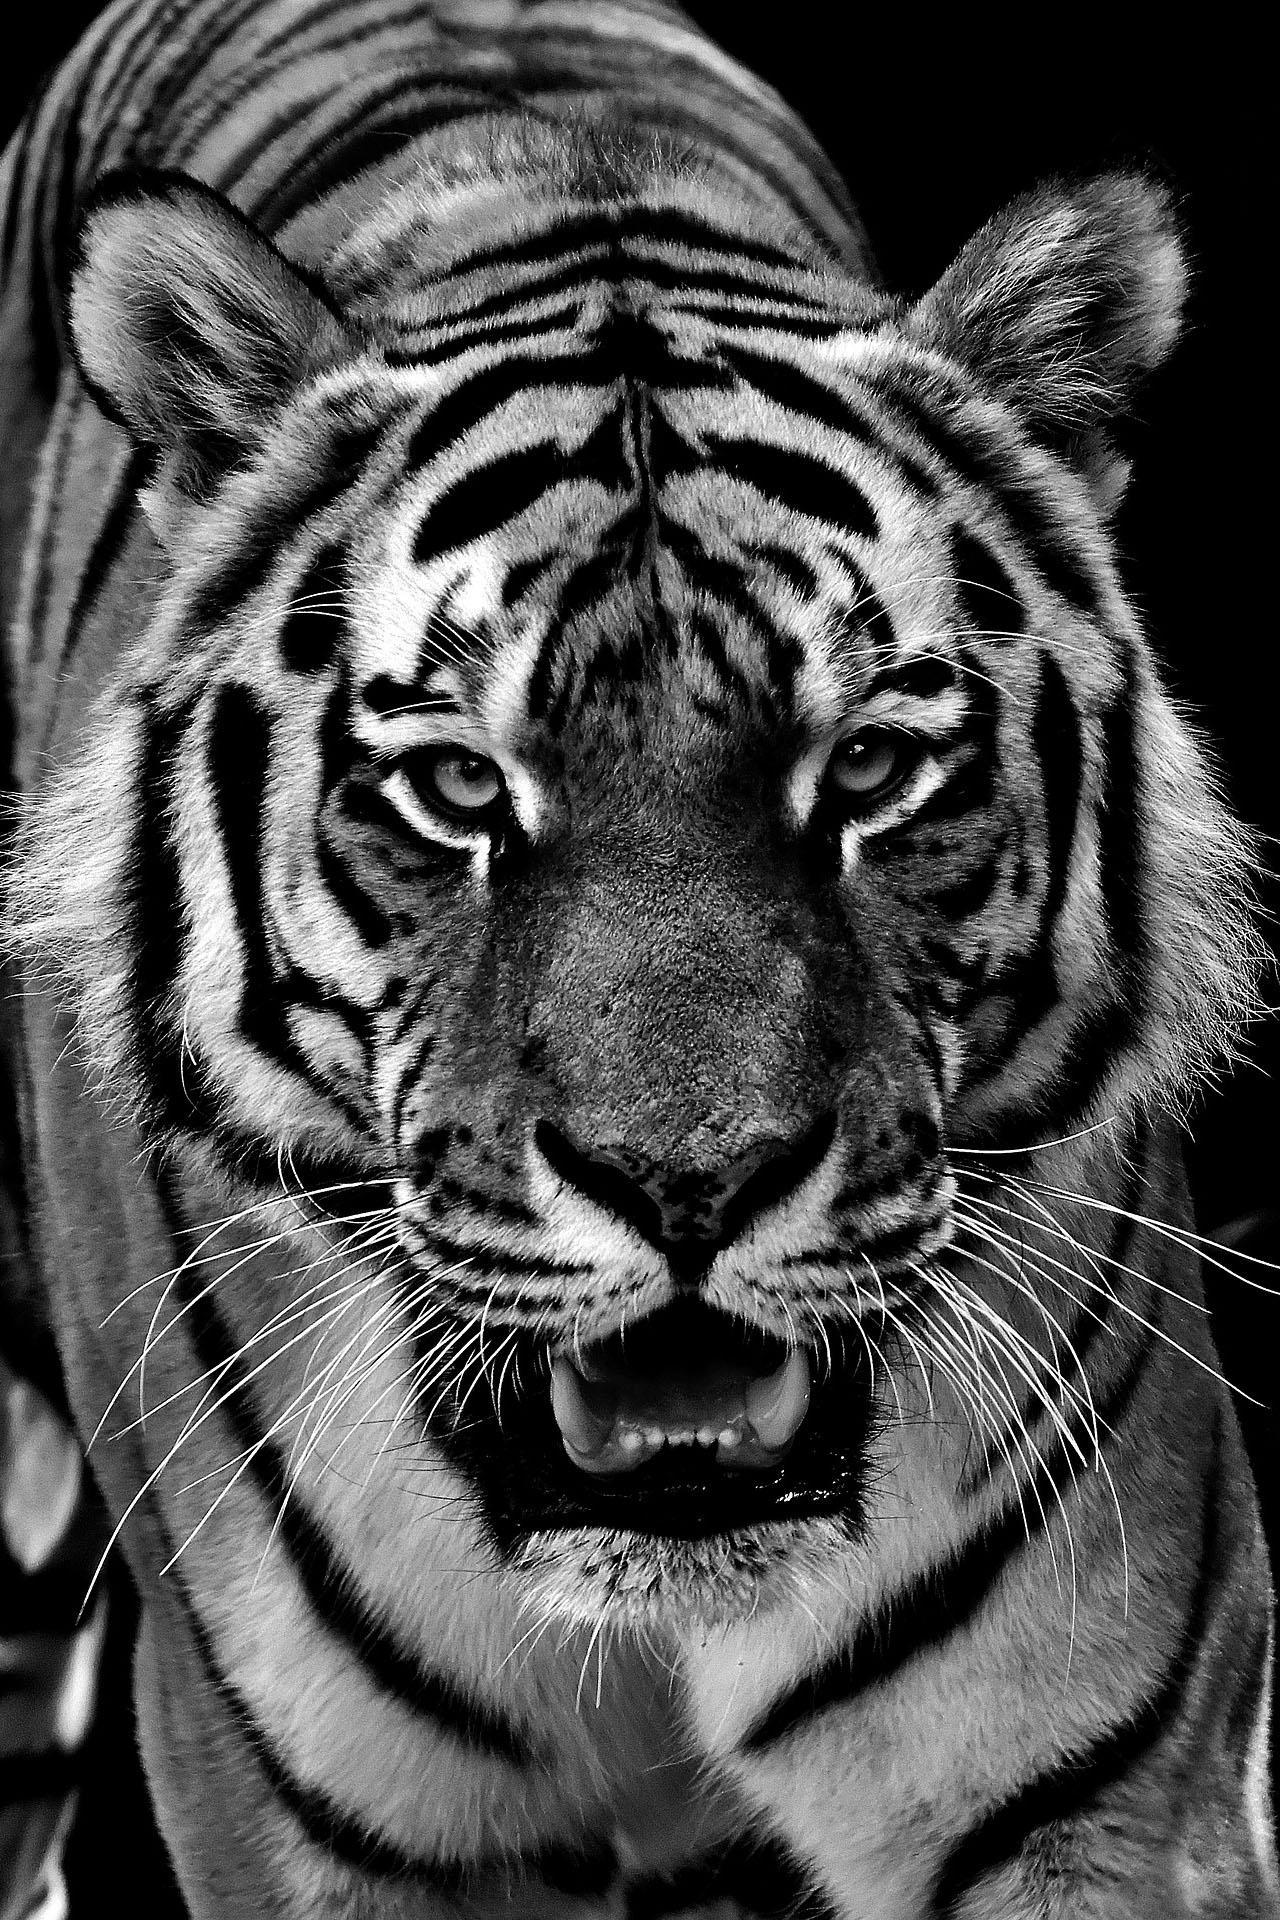  Tiger  Wallpaper  HD  backgrounds  themes for Android  